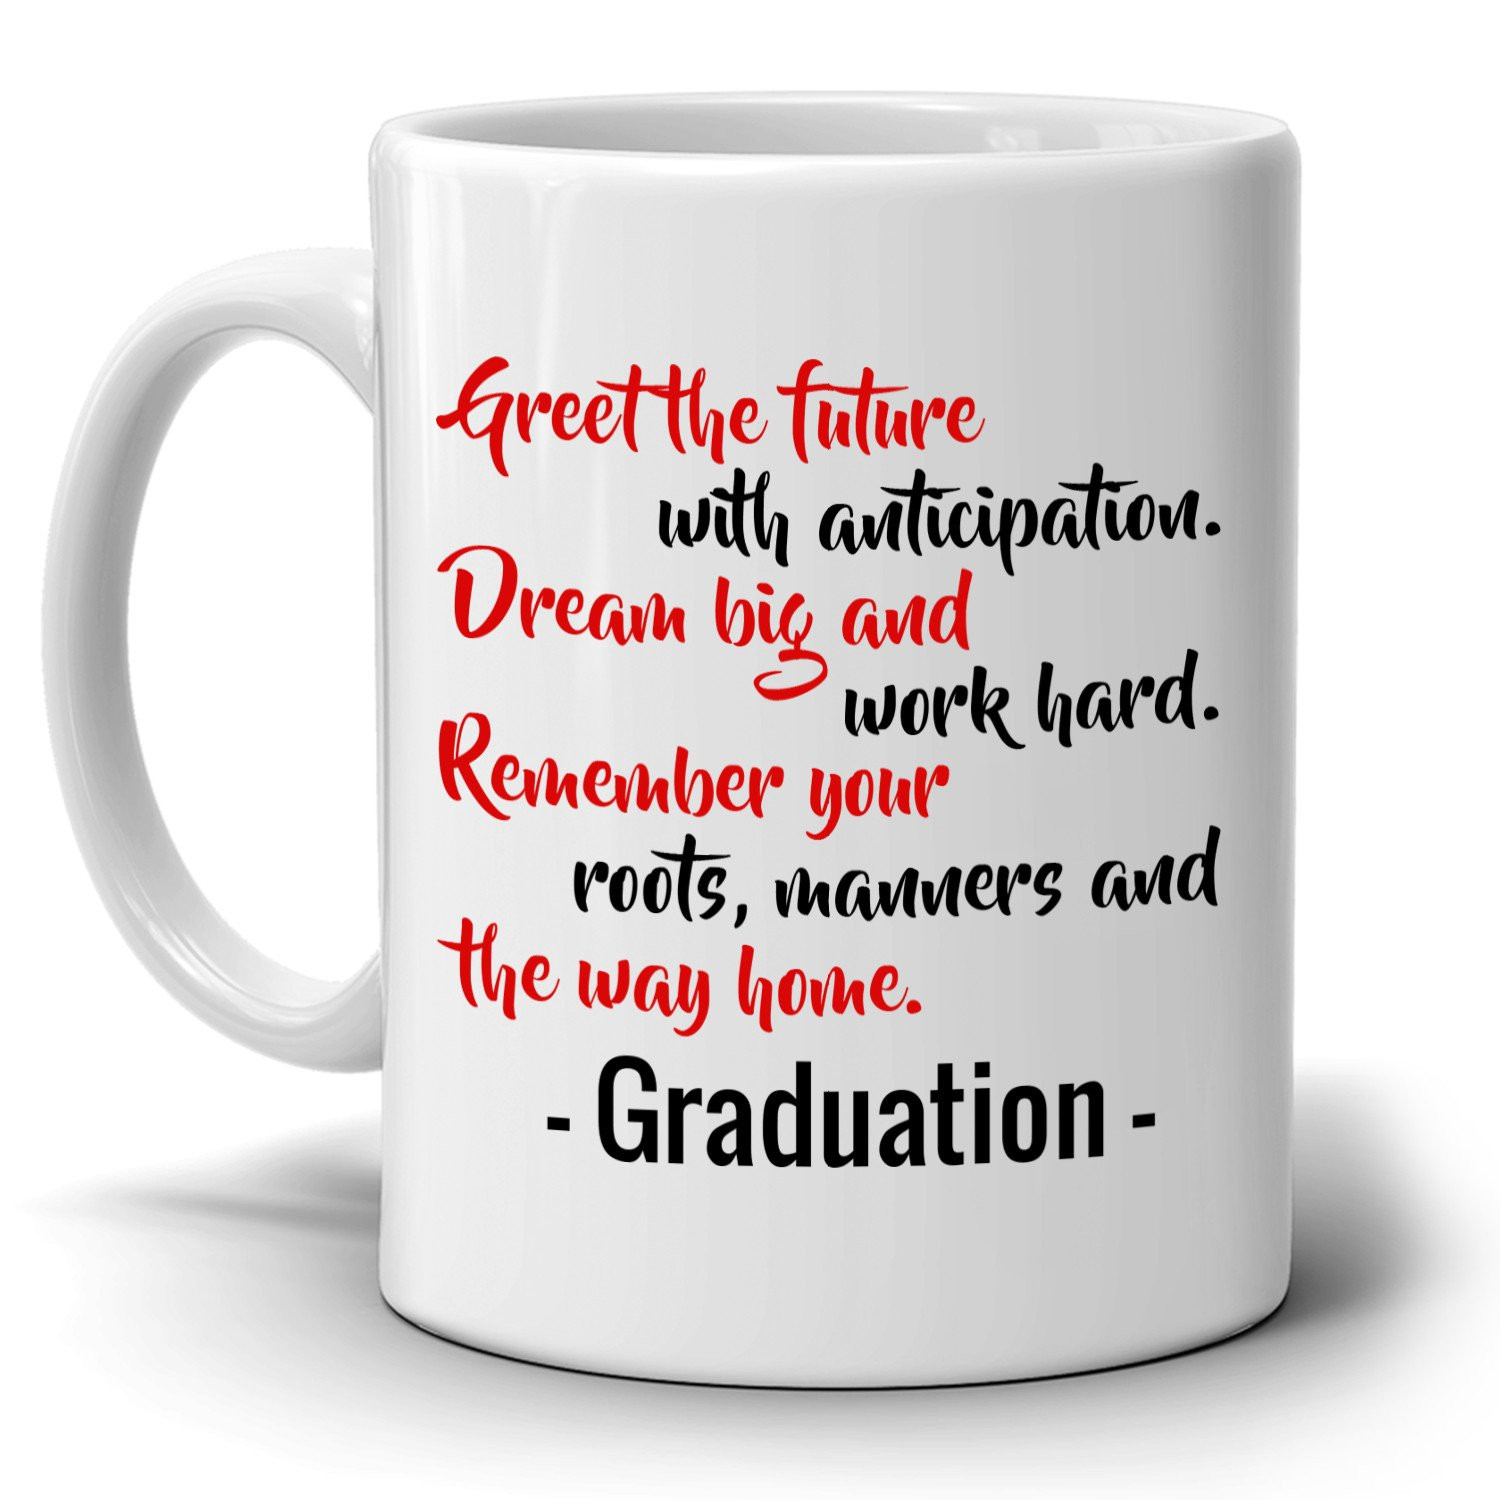 2017 Graduation Quotes
 Inspirational College Graduation Quotes Gift 2017 Coffee